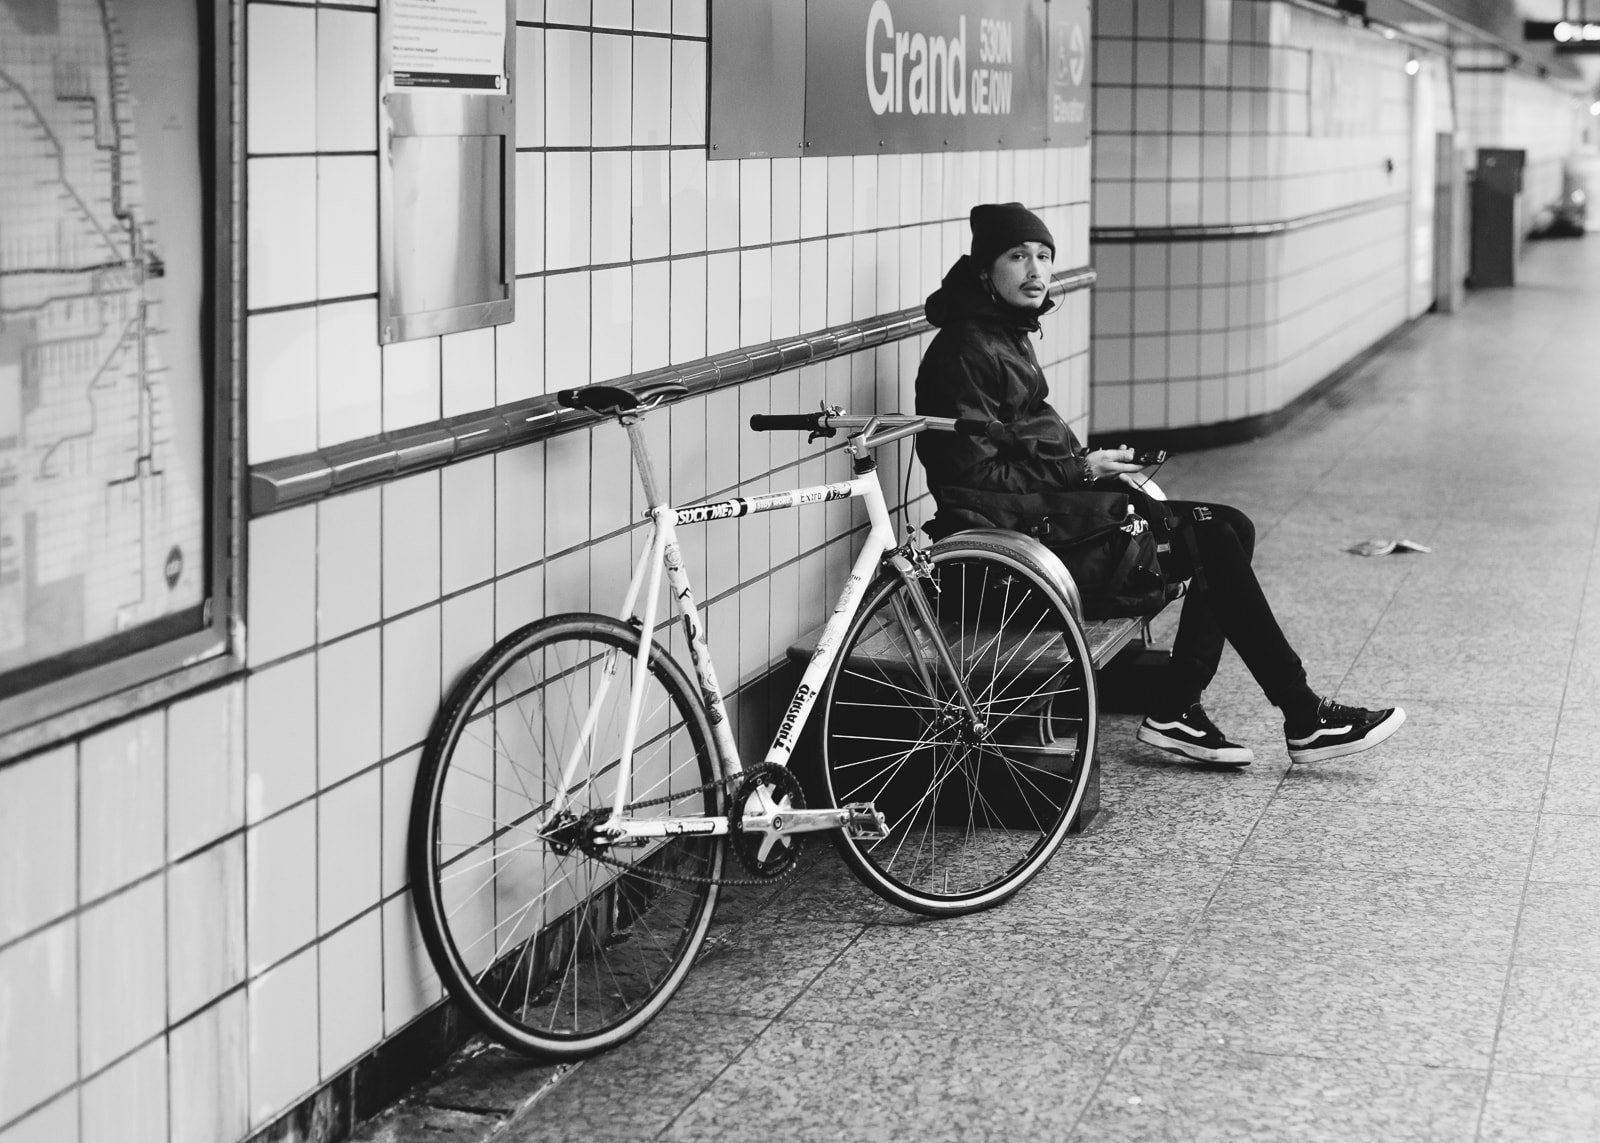 A bicyclist at the train station in Chicago